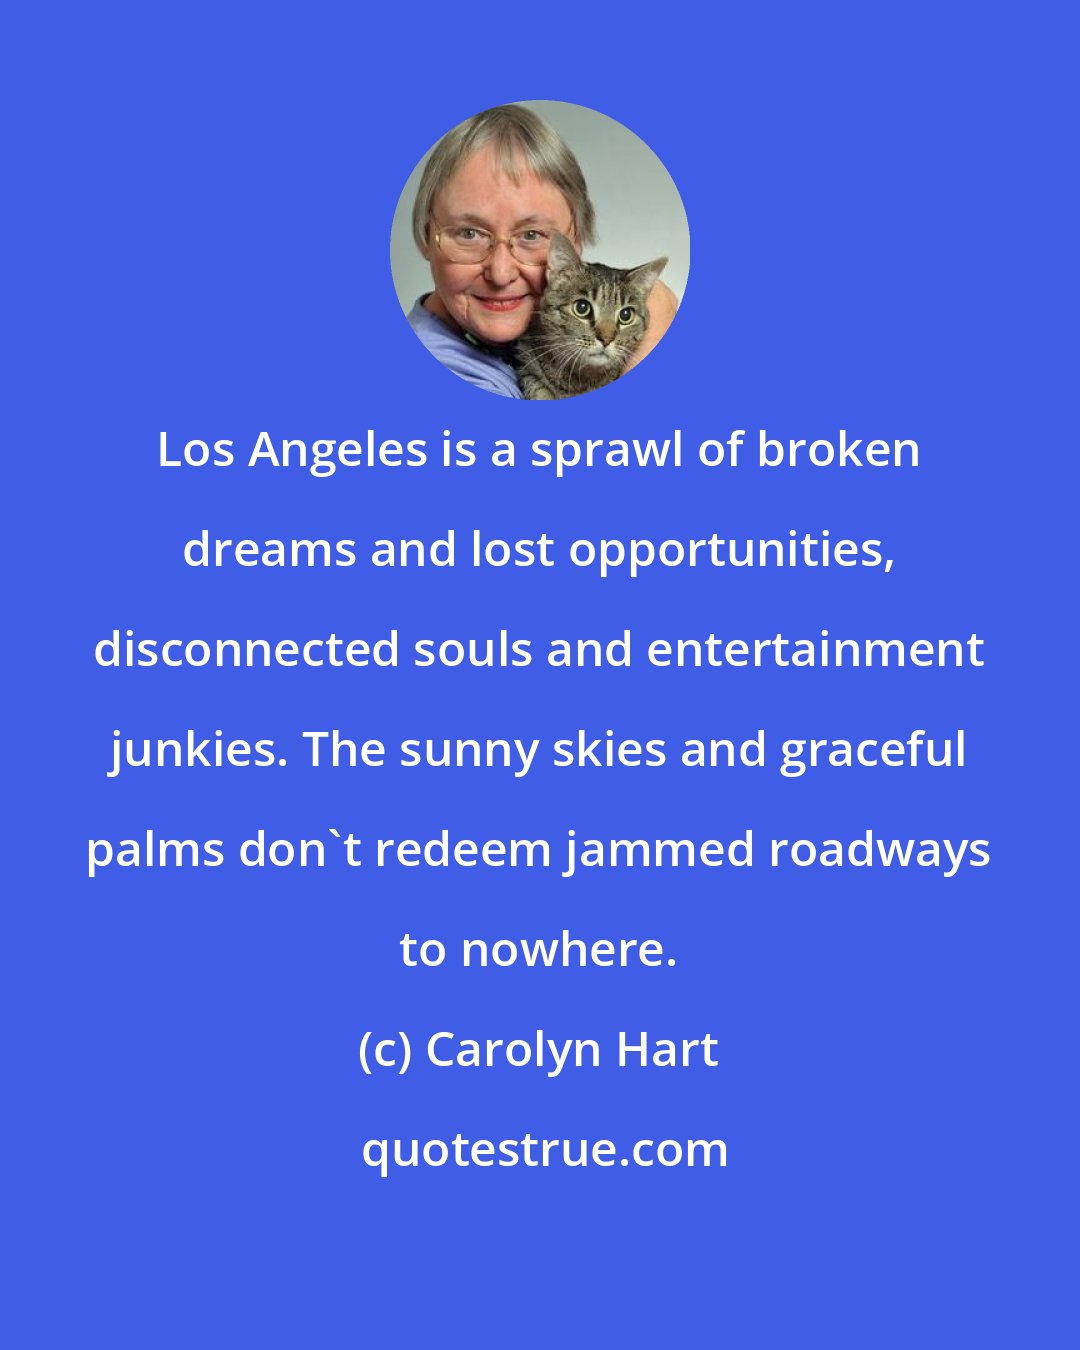 Carolyn Hart: Los Angeles is a sprawl of broken dreams and lost opportunities, disconnected souls and entertainment junkies. The sunny skies and graceful palms don't redeem jammed roadways to nowhere.